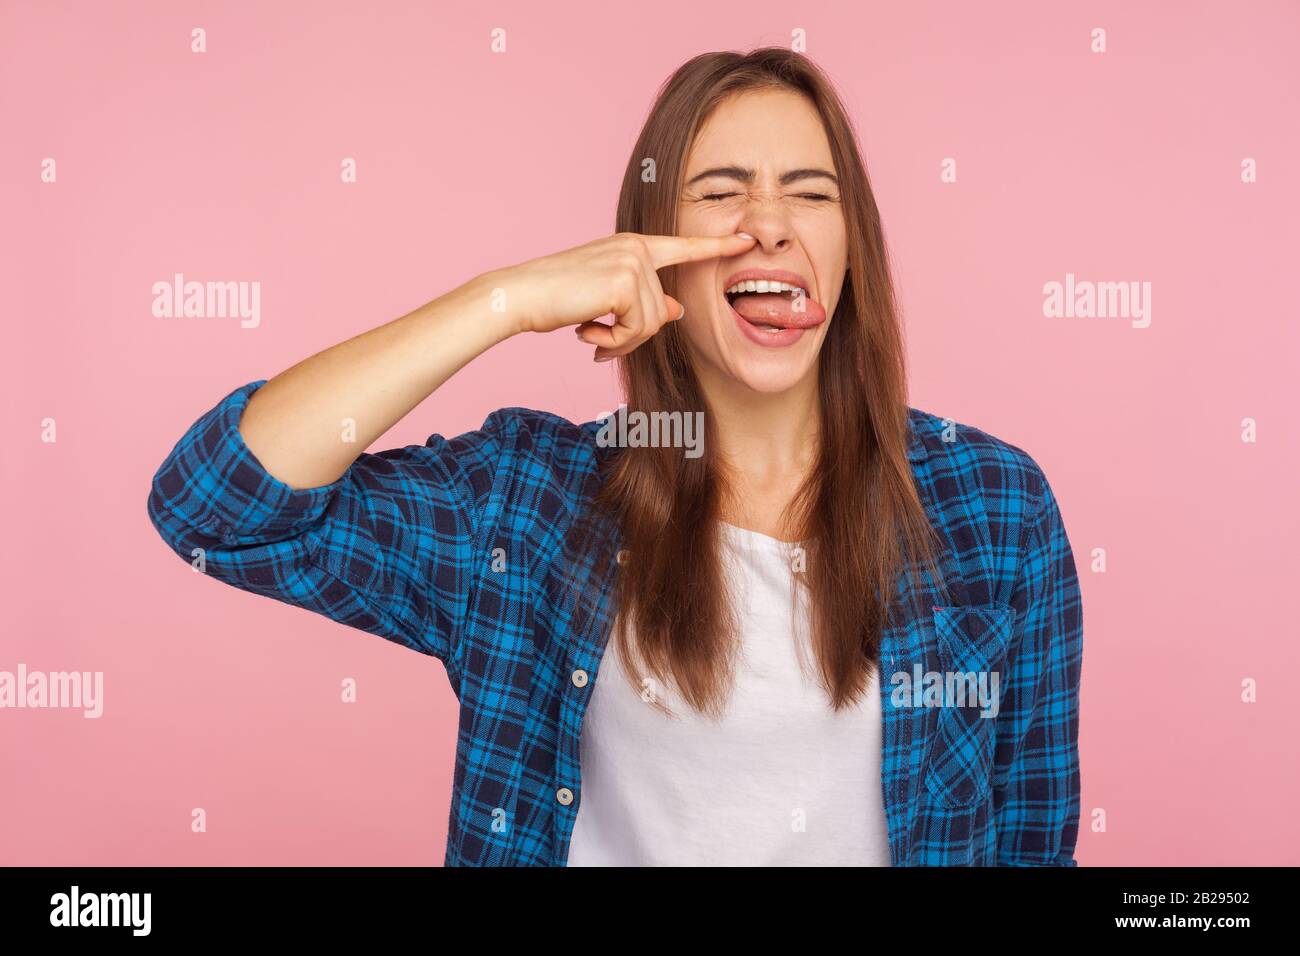 Portrait of girl in checkered shirt picking nose pulling out boogers with disgust expression, bad manners concept and misconduct, uncultured gross hab Stock Photo